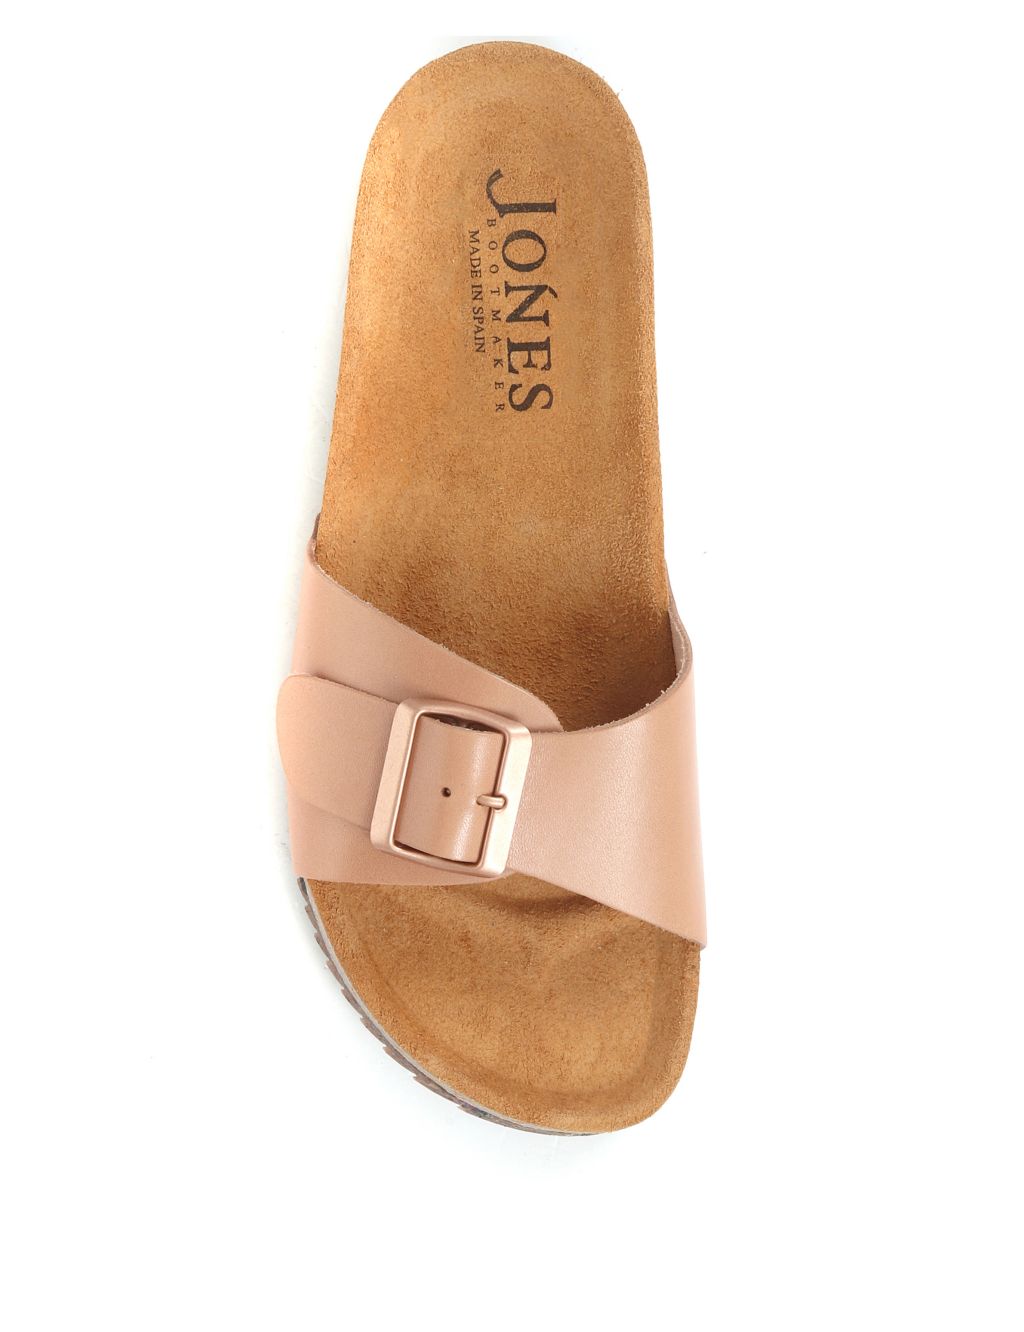 Leather Buckle Flat Mules image 3